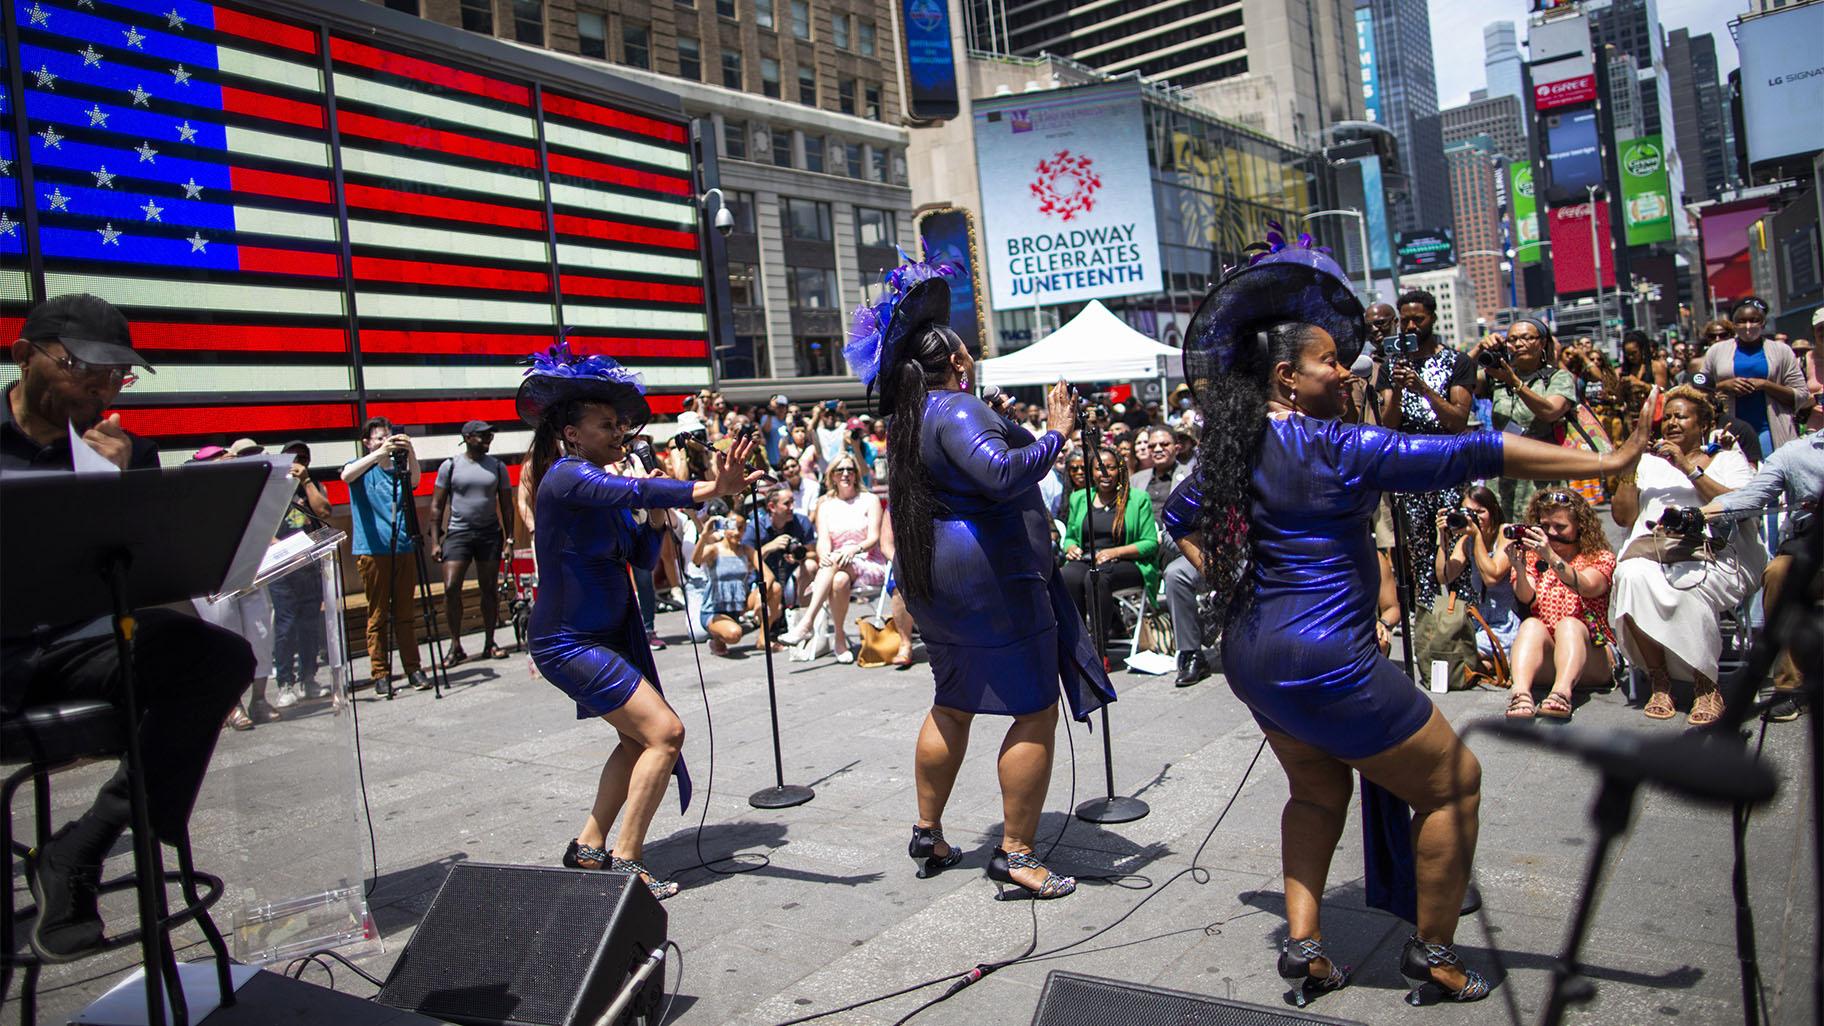 Selena Quinn, from left, LaVon Fisher-Wilson and Traci Coleman perform during a free outdoor event organized by The Broadway League as Juneteenth's celebrations take place at Times Square Saturday, June 19, 2021, in New York. (AP Photo / Eduardo Munoz Alvarez)